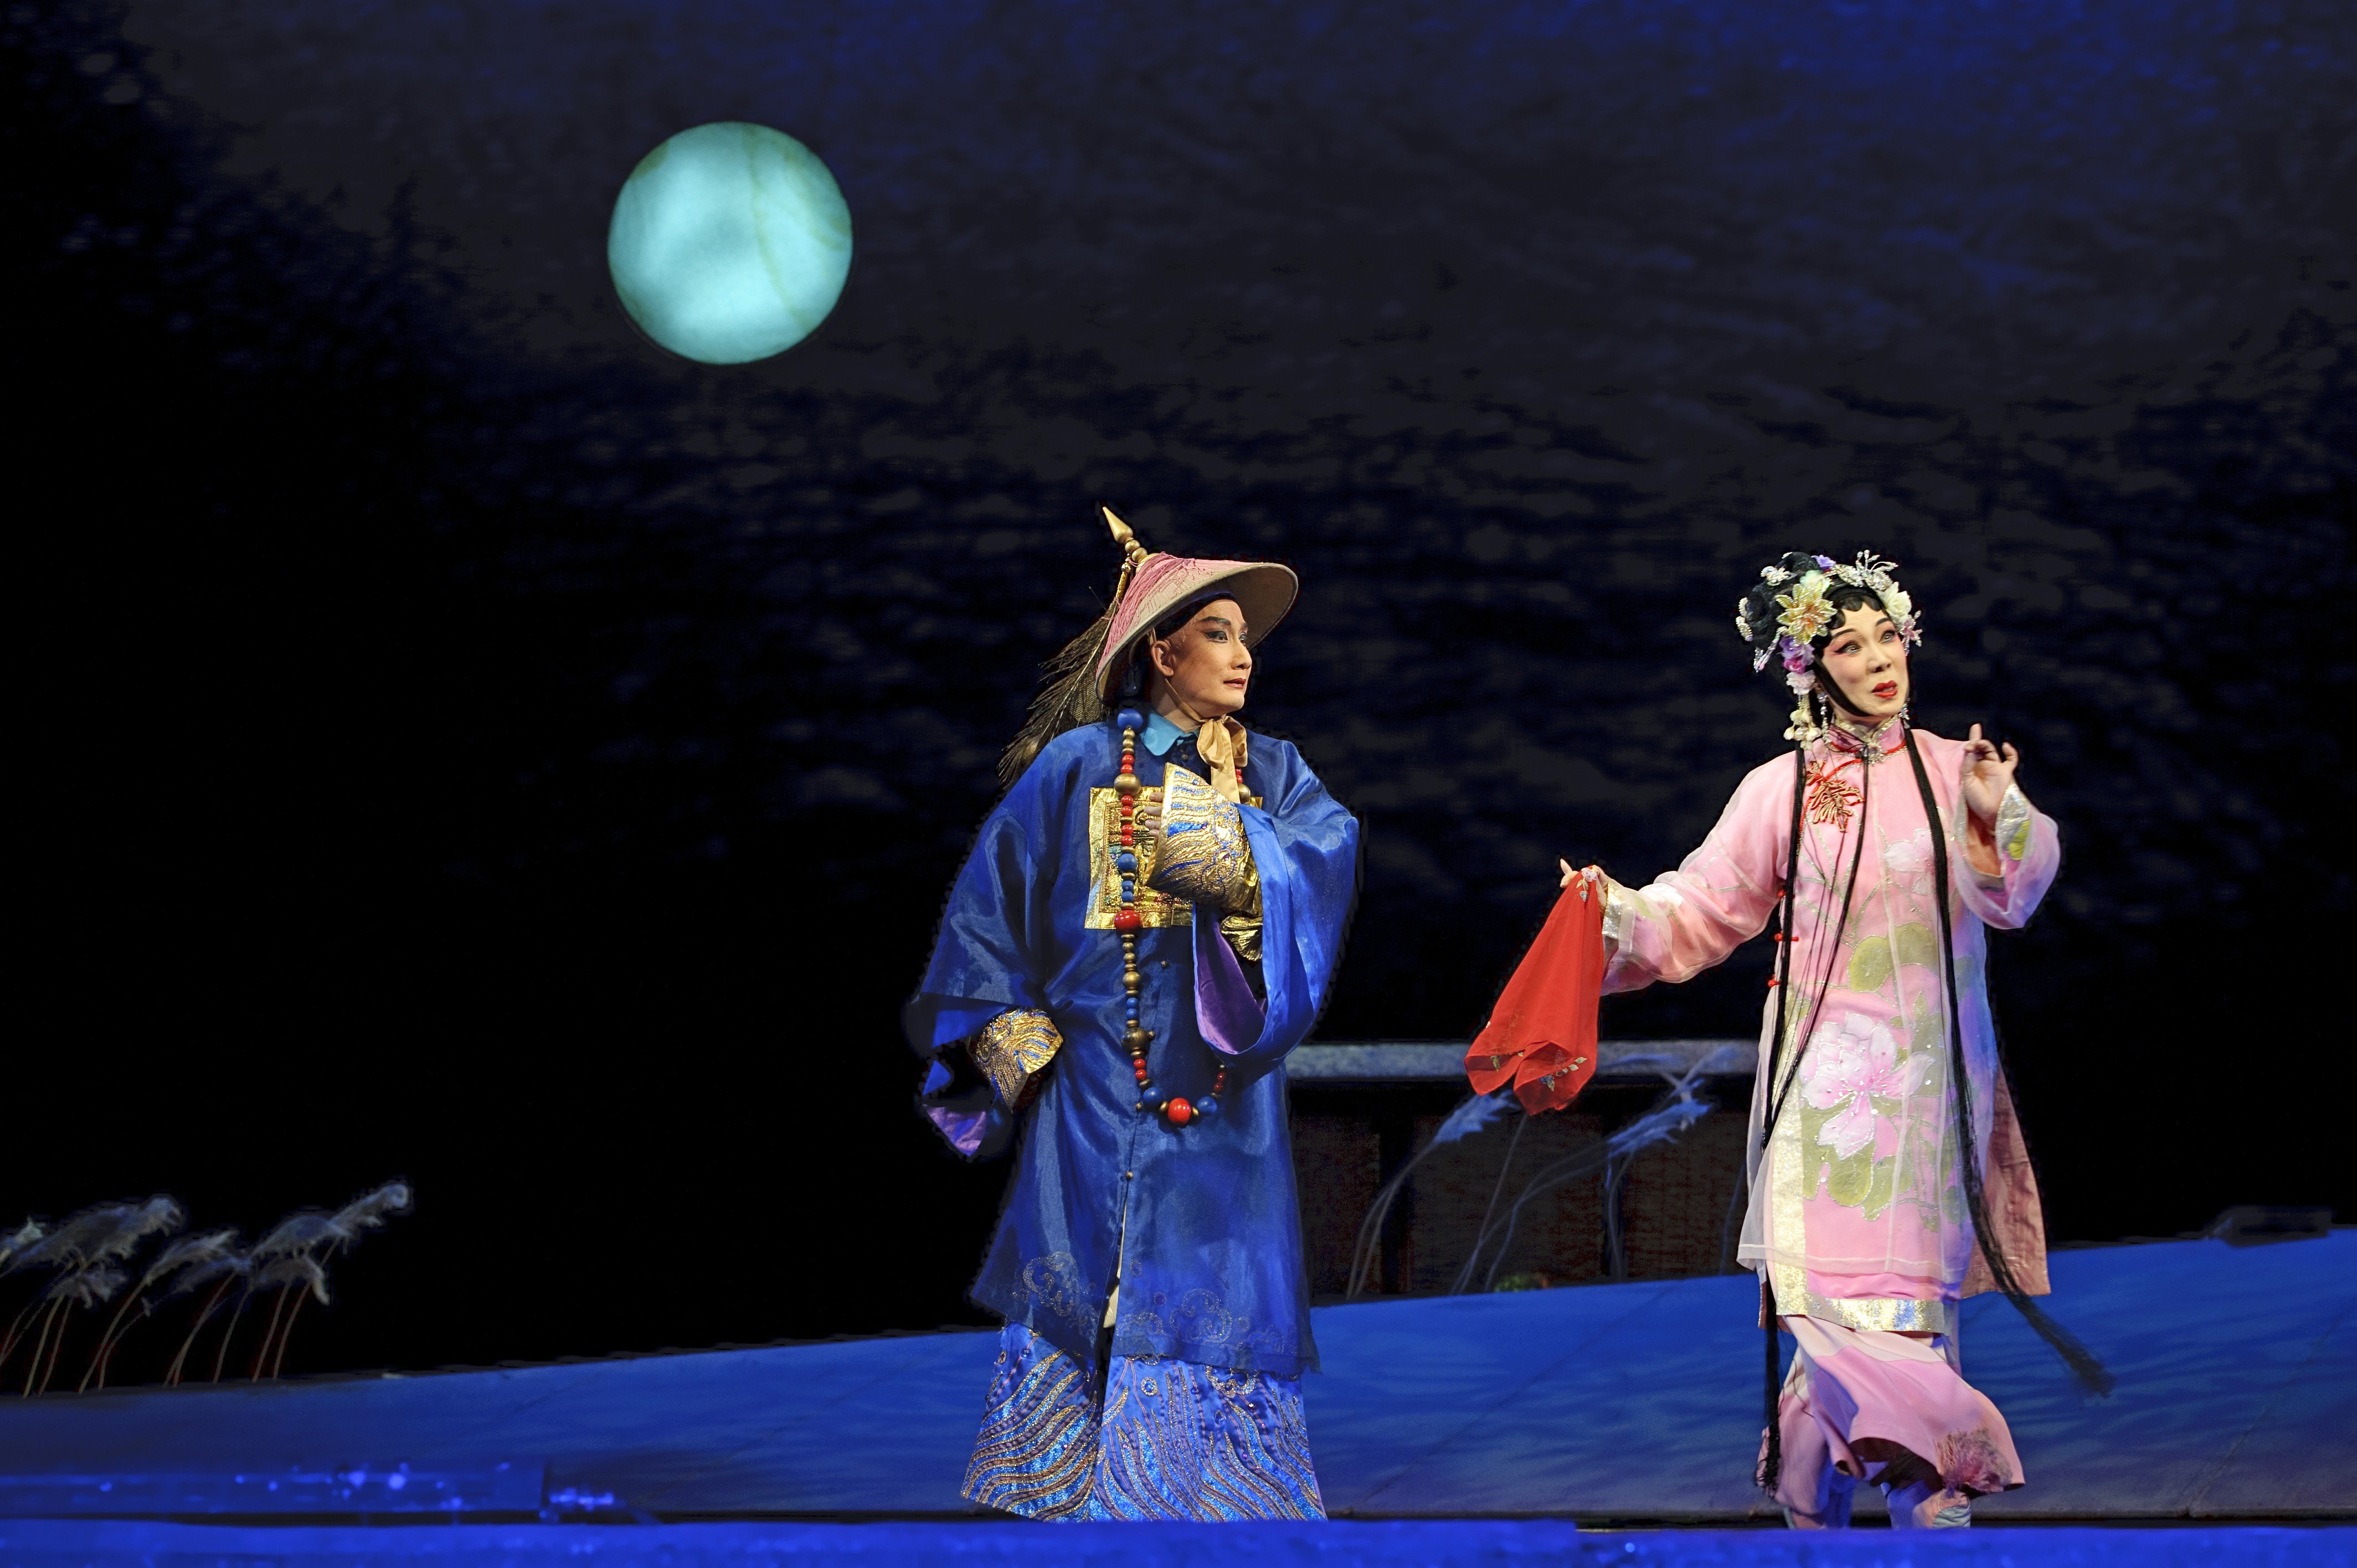 Two highly anticipated Cantonese opera productions, the newly adapted, ‘A Love Poem Stained with Blood’, and ‘Guangdong Quadrangle – Four Folk Music Types in Concert’ are being staged as part of this year’s Chinese Opera Festival in Hong Kong.